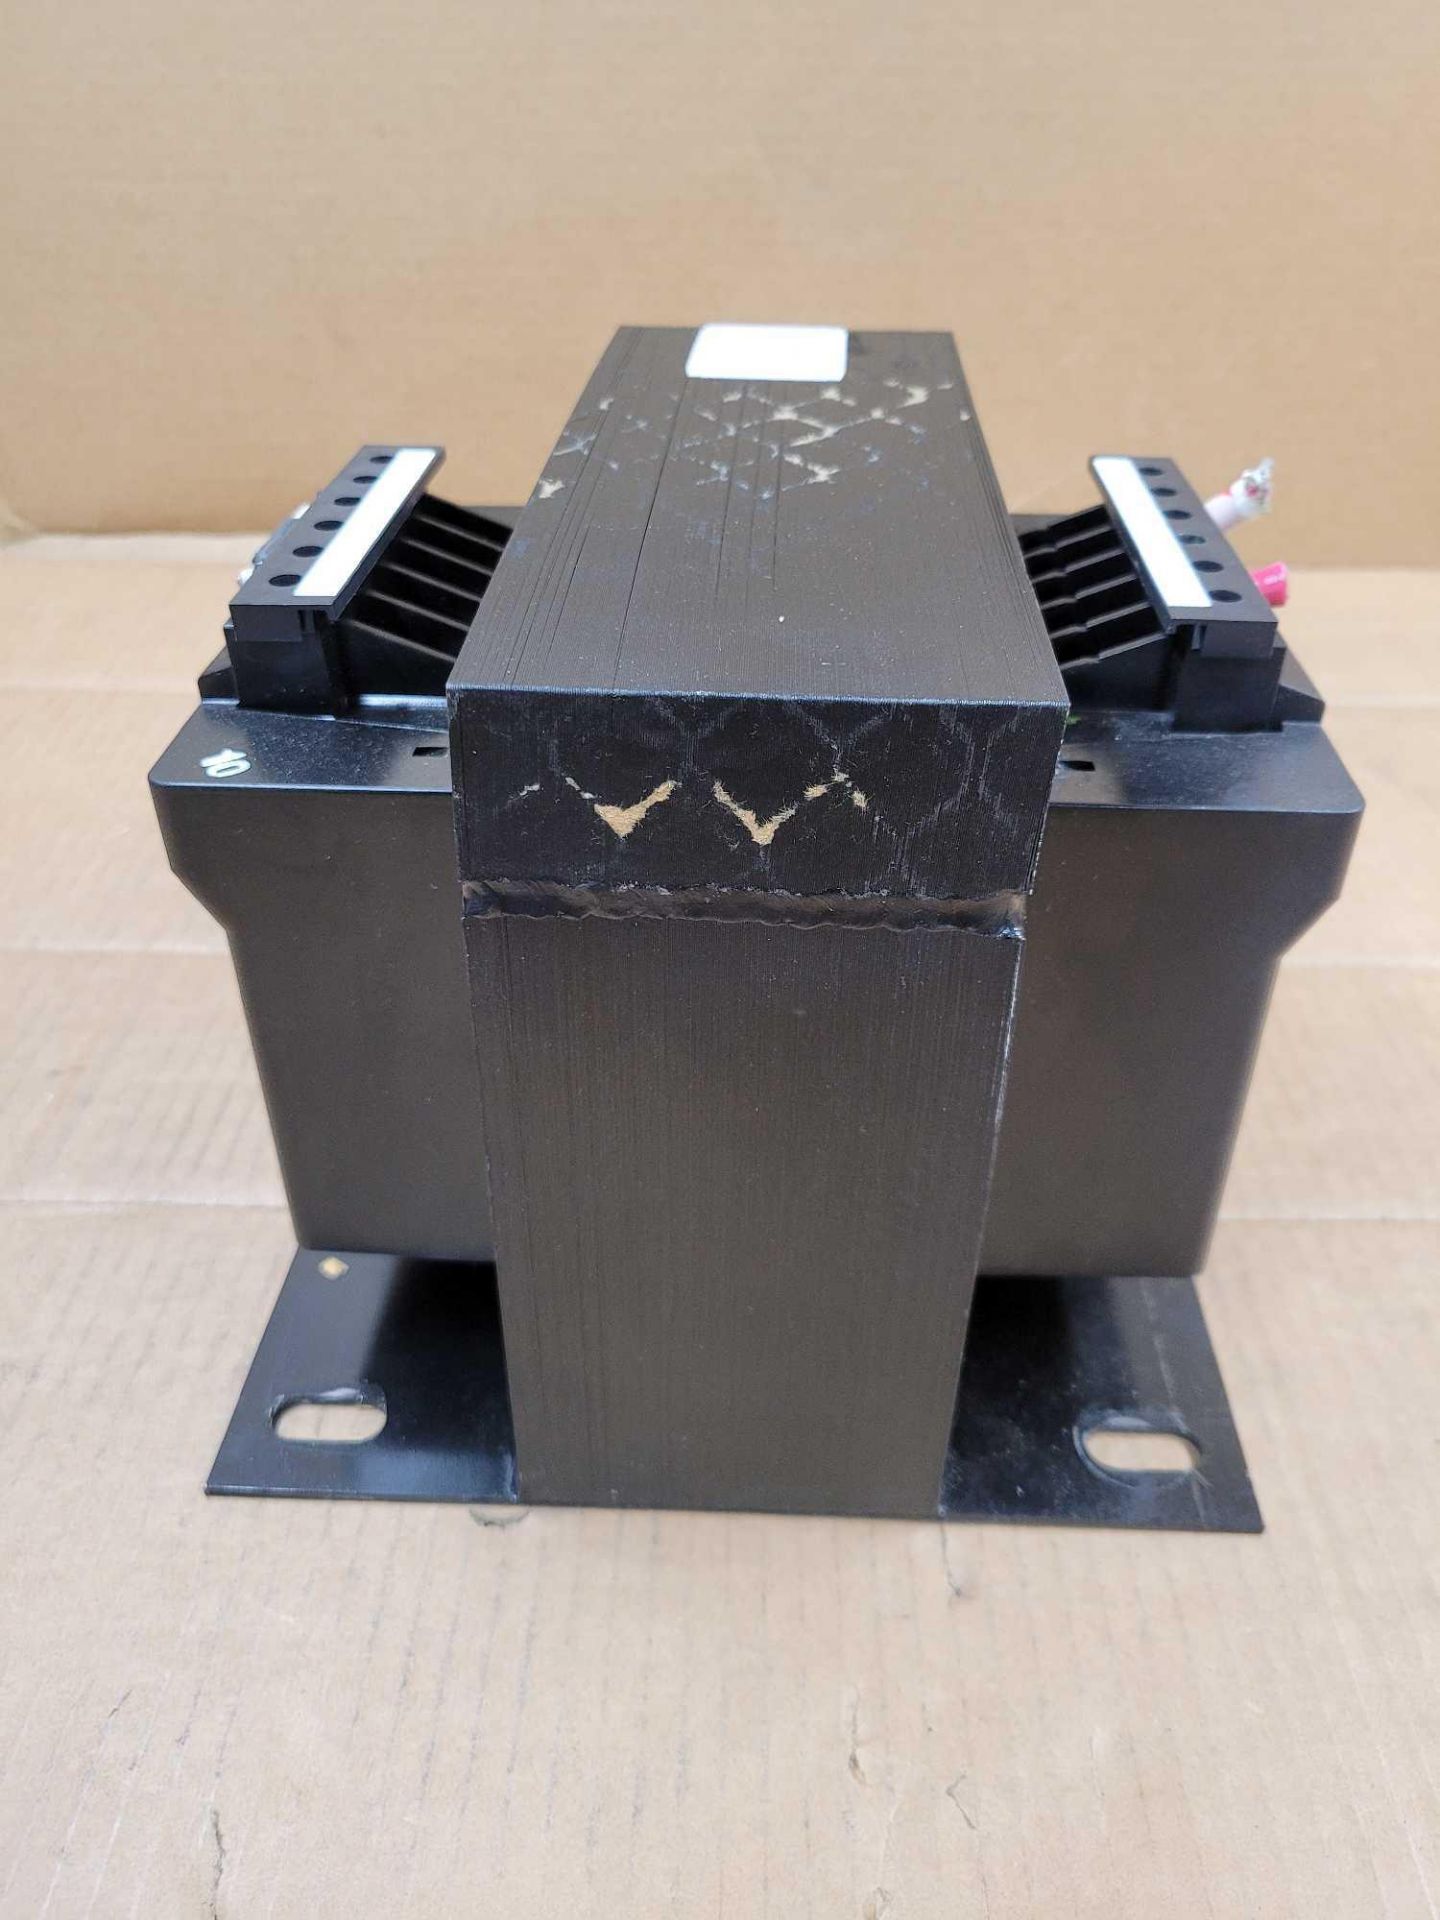 SIEMENS MTG5000A / Series B Industrial Control Transformer  /  Lot Weight: 73.6 lbs - Image 3 of 7